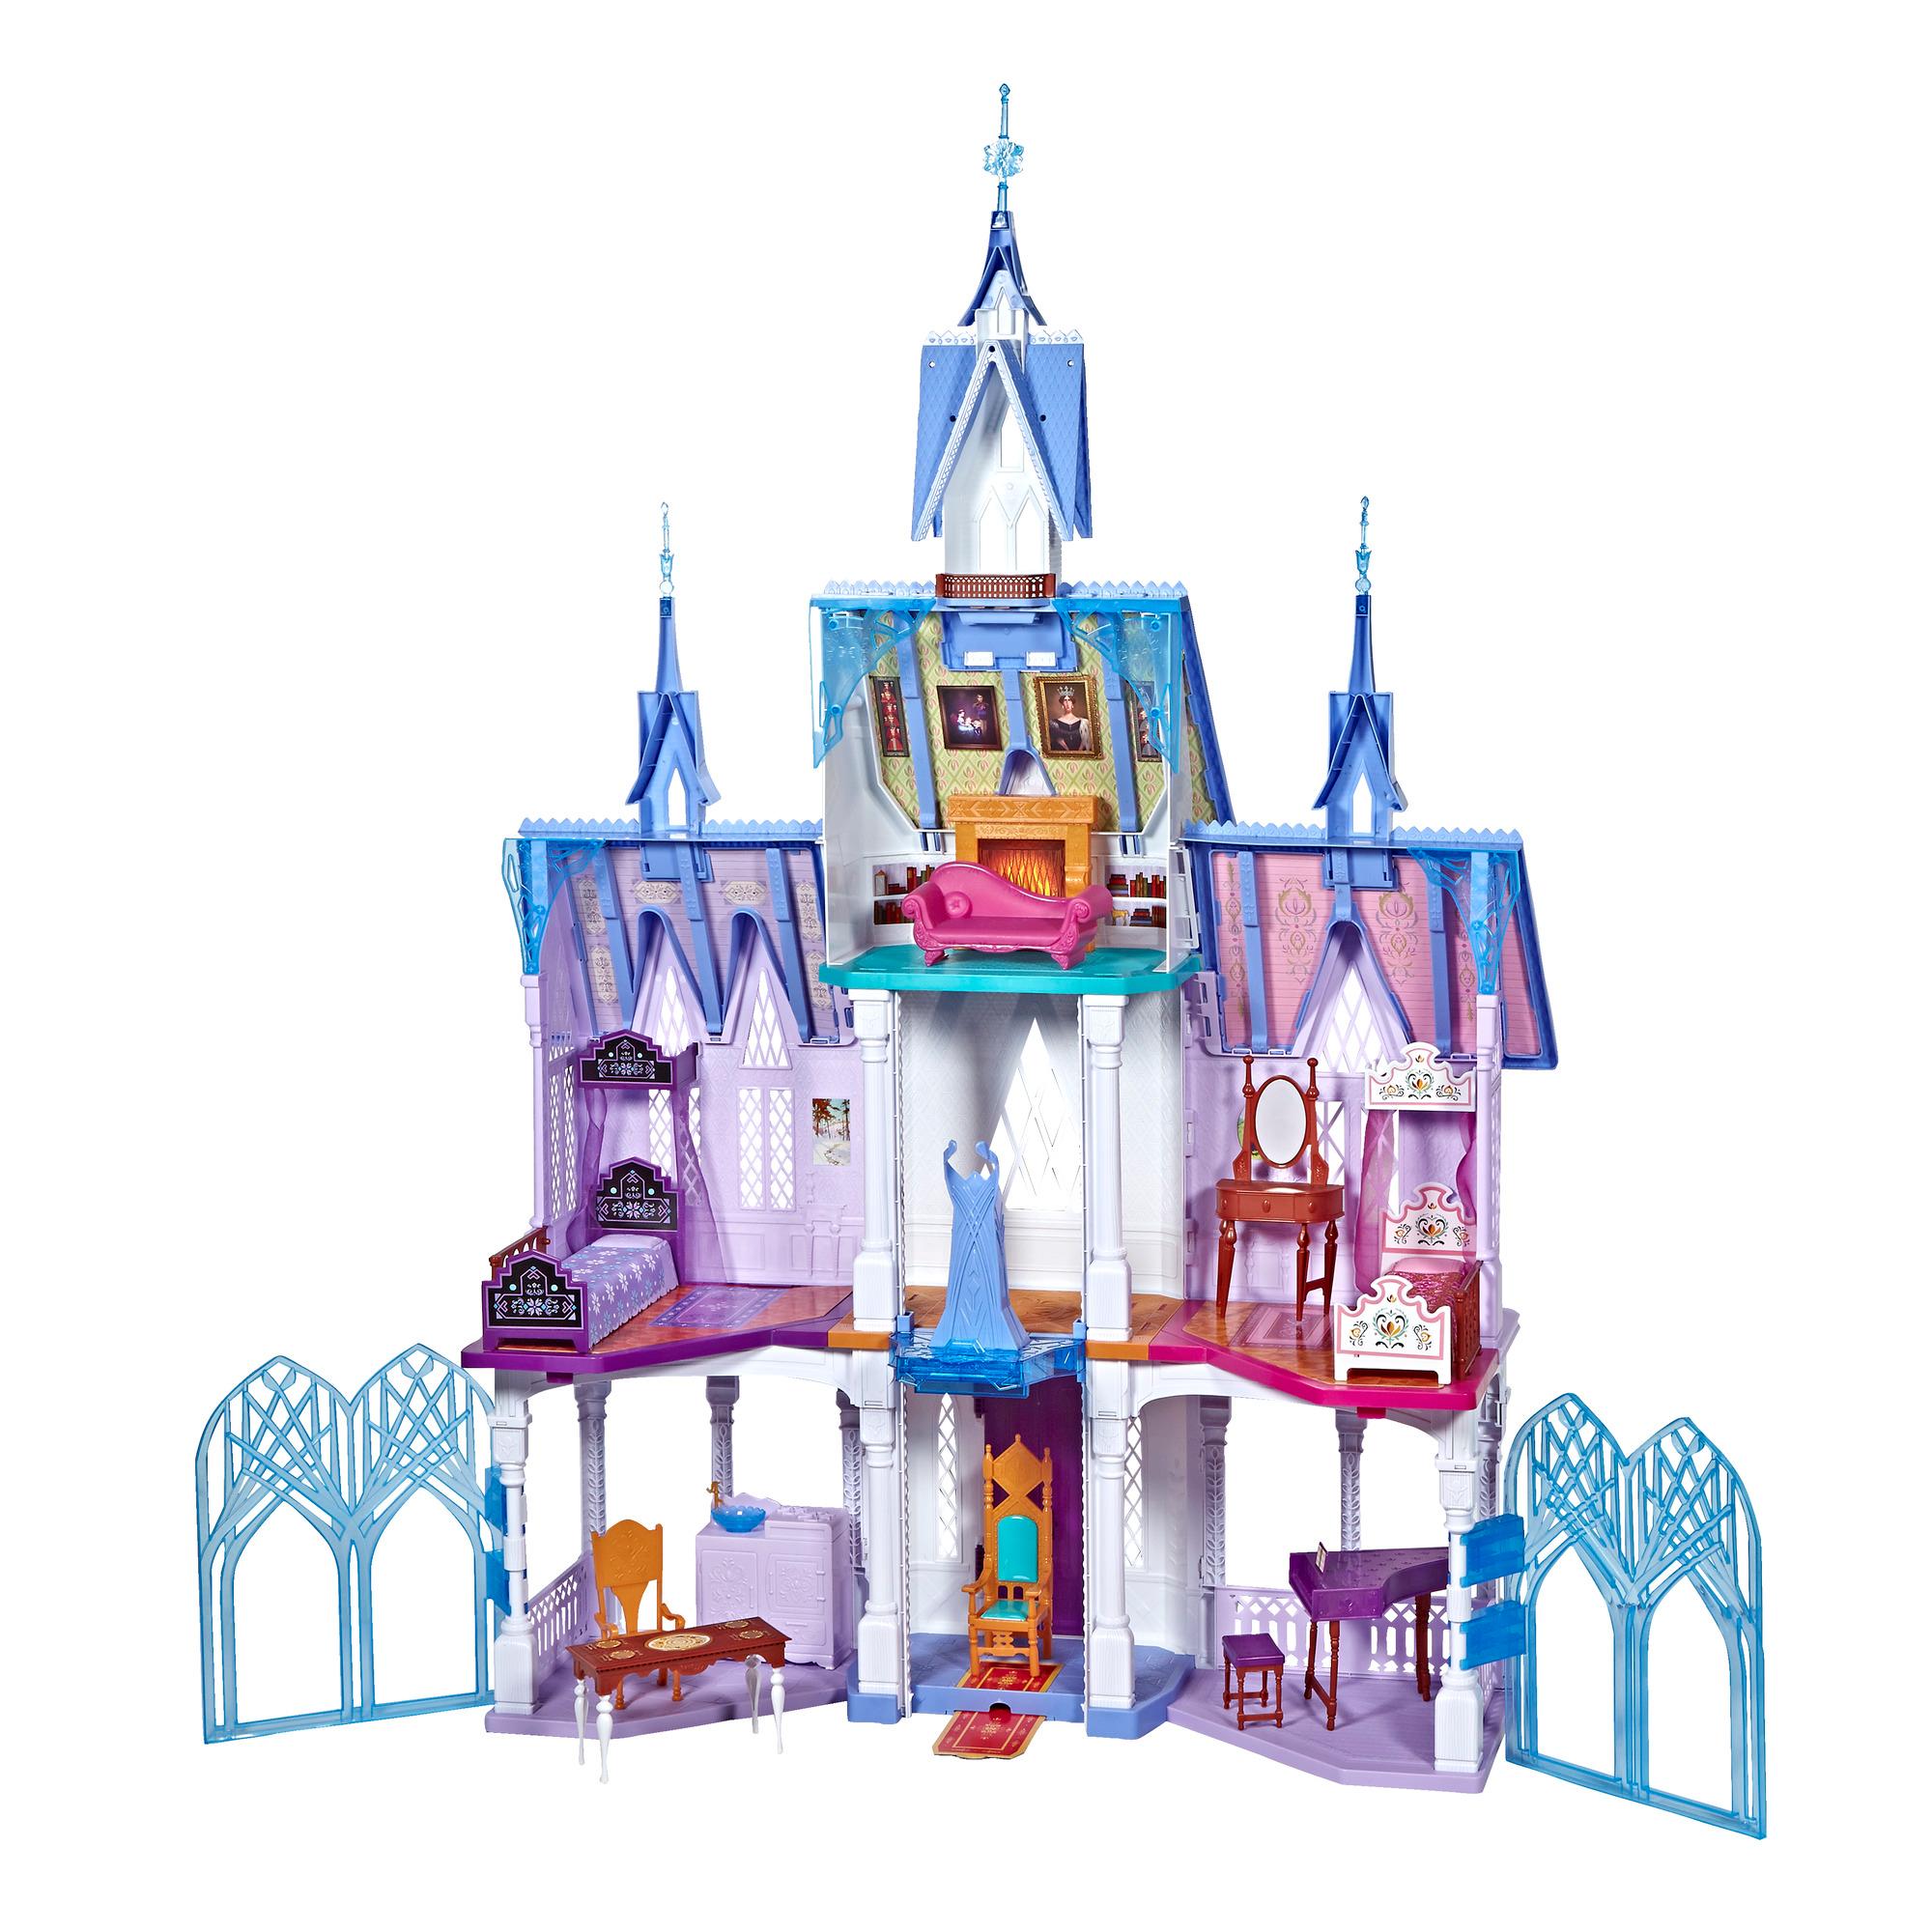 Disney Frozen Ultimate Arendelle Castle Playset Inspired by the Frozen 2 Movie